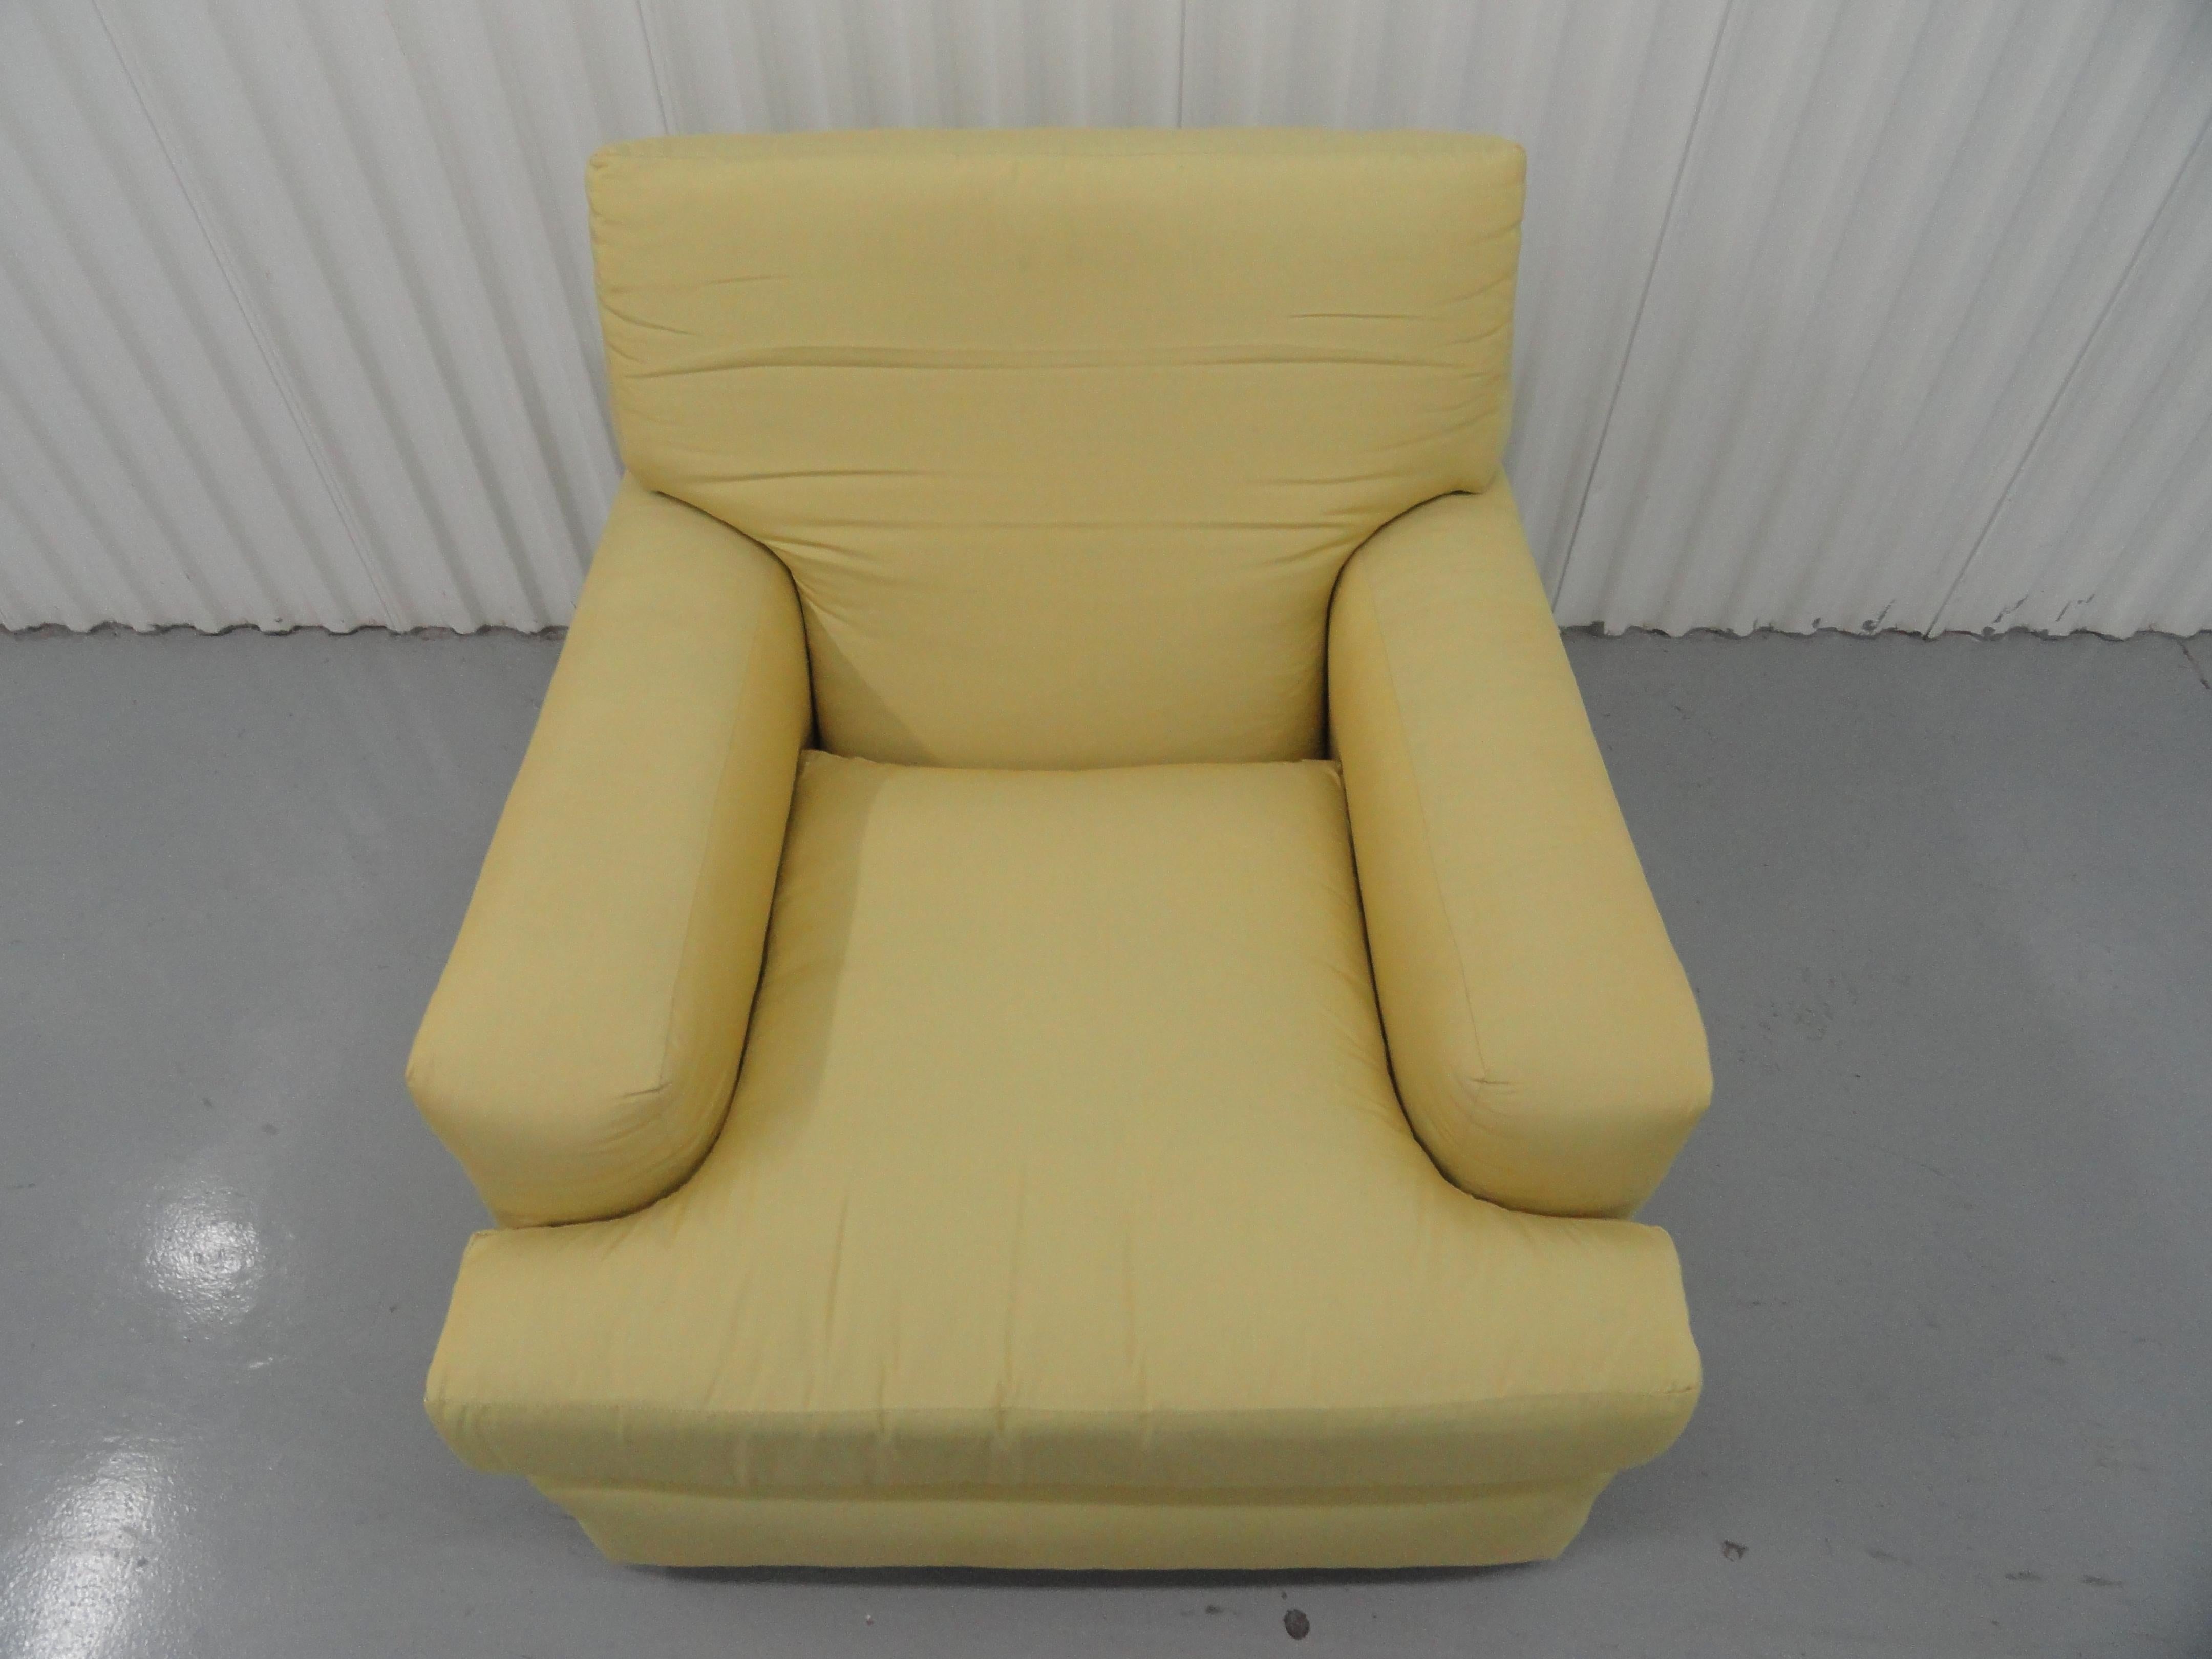 Club chair style based on Jean-Michel Frank Classic 